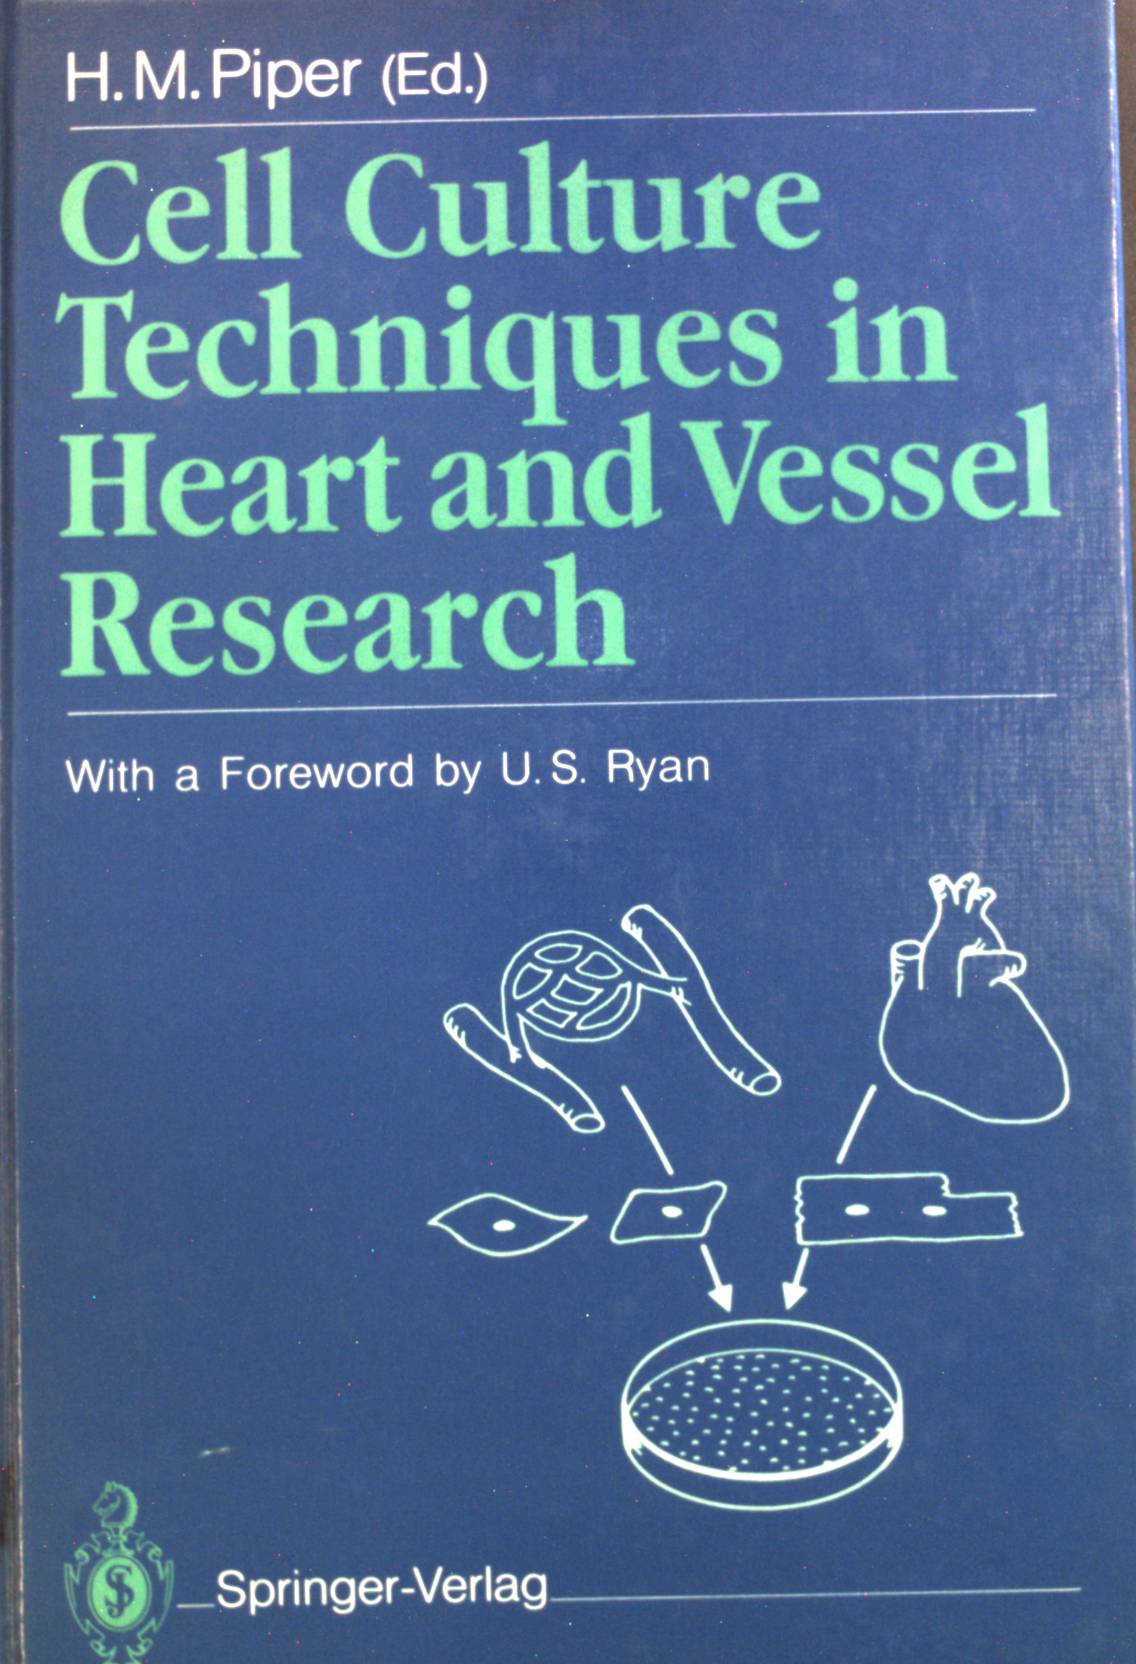 Cell Culture Techniques in Heart and Vessel Research. - Piper, H. M.